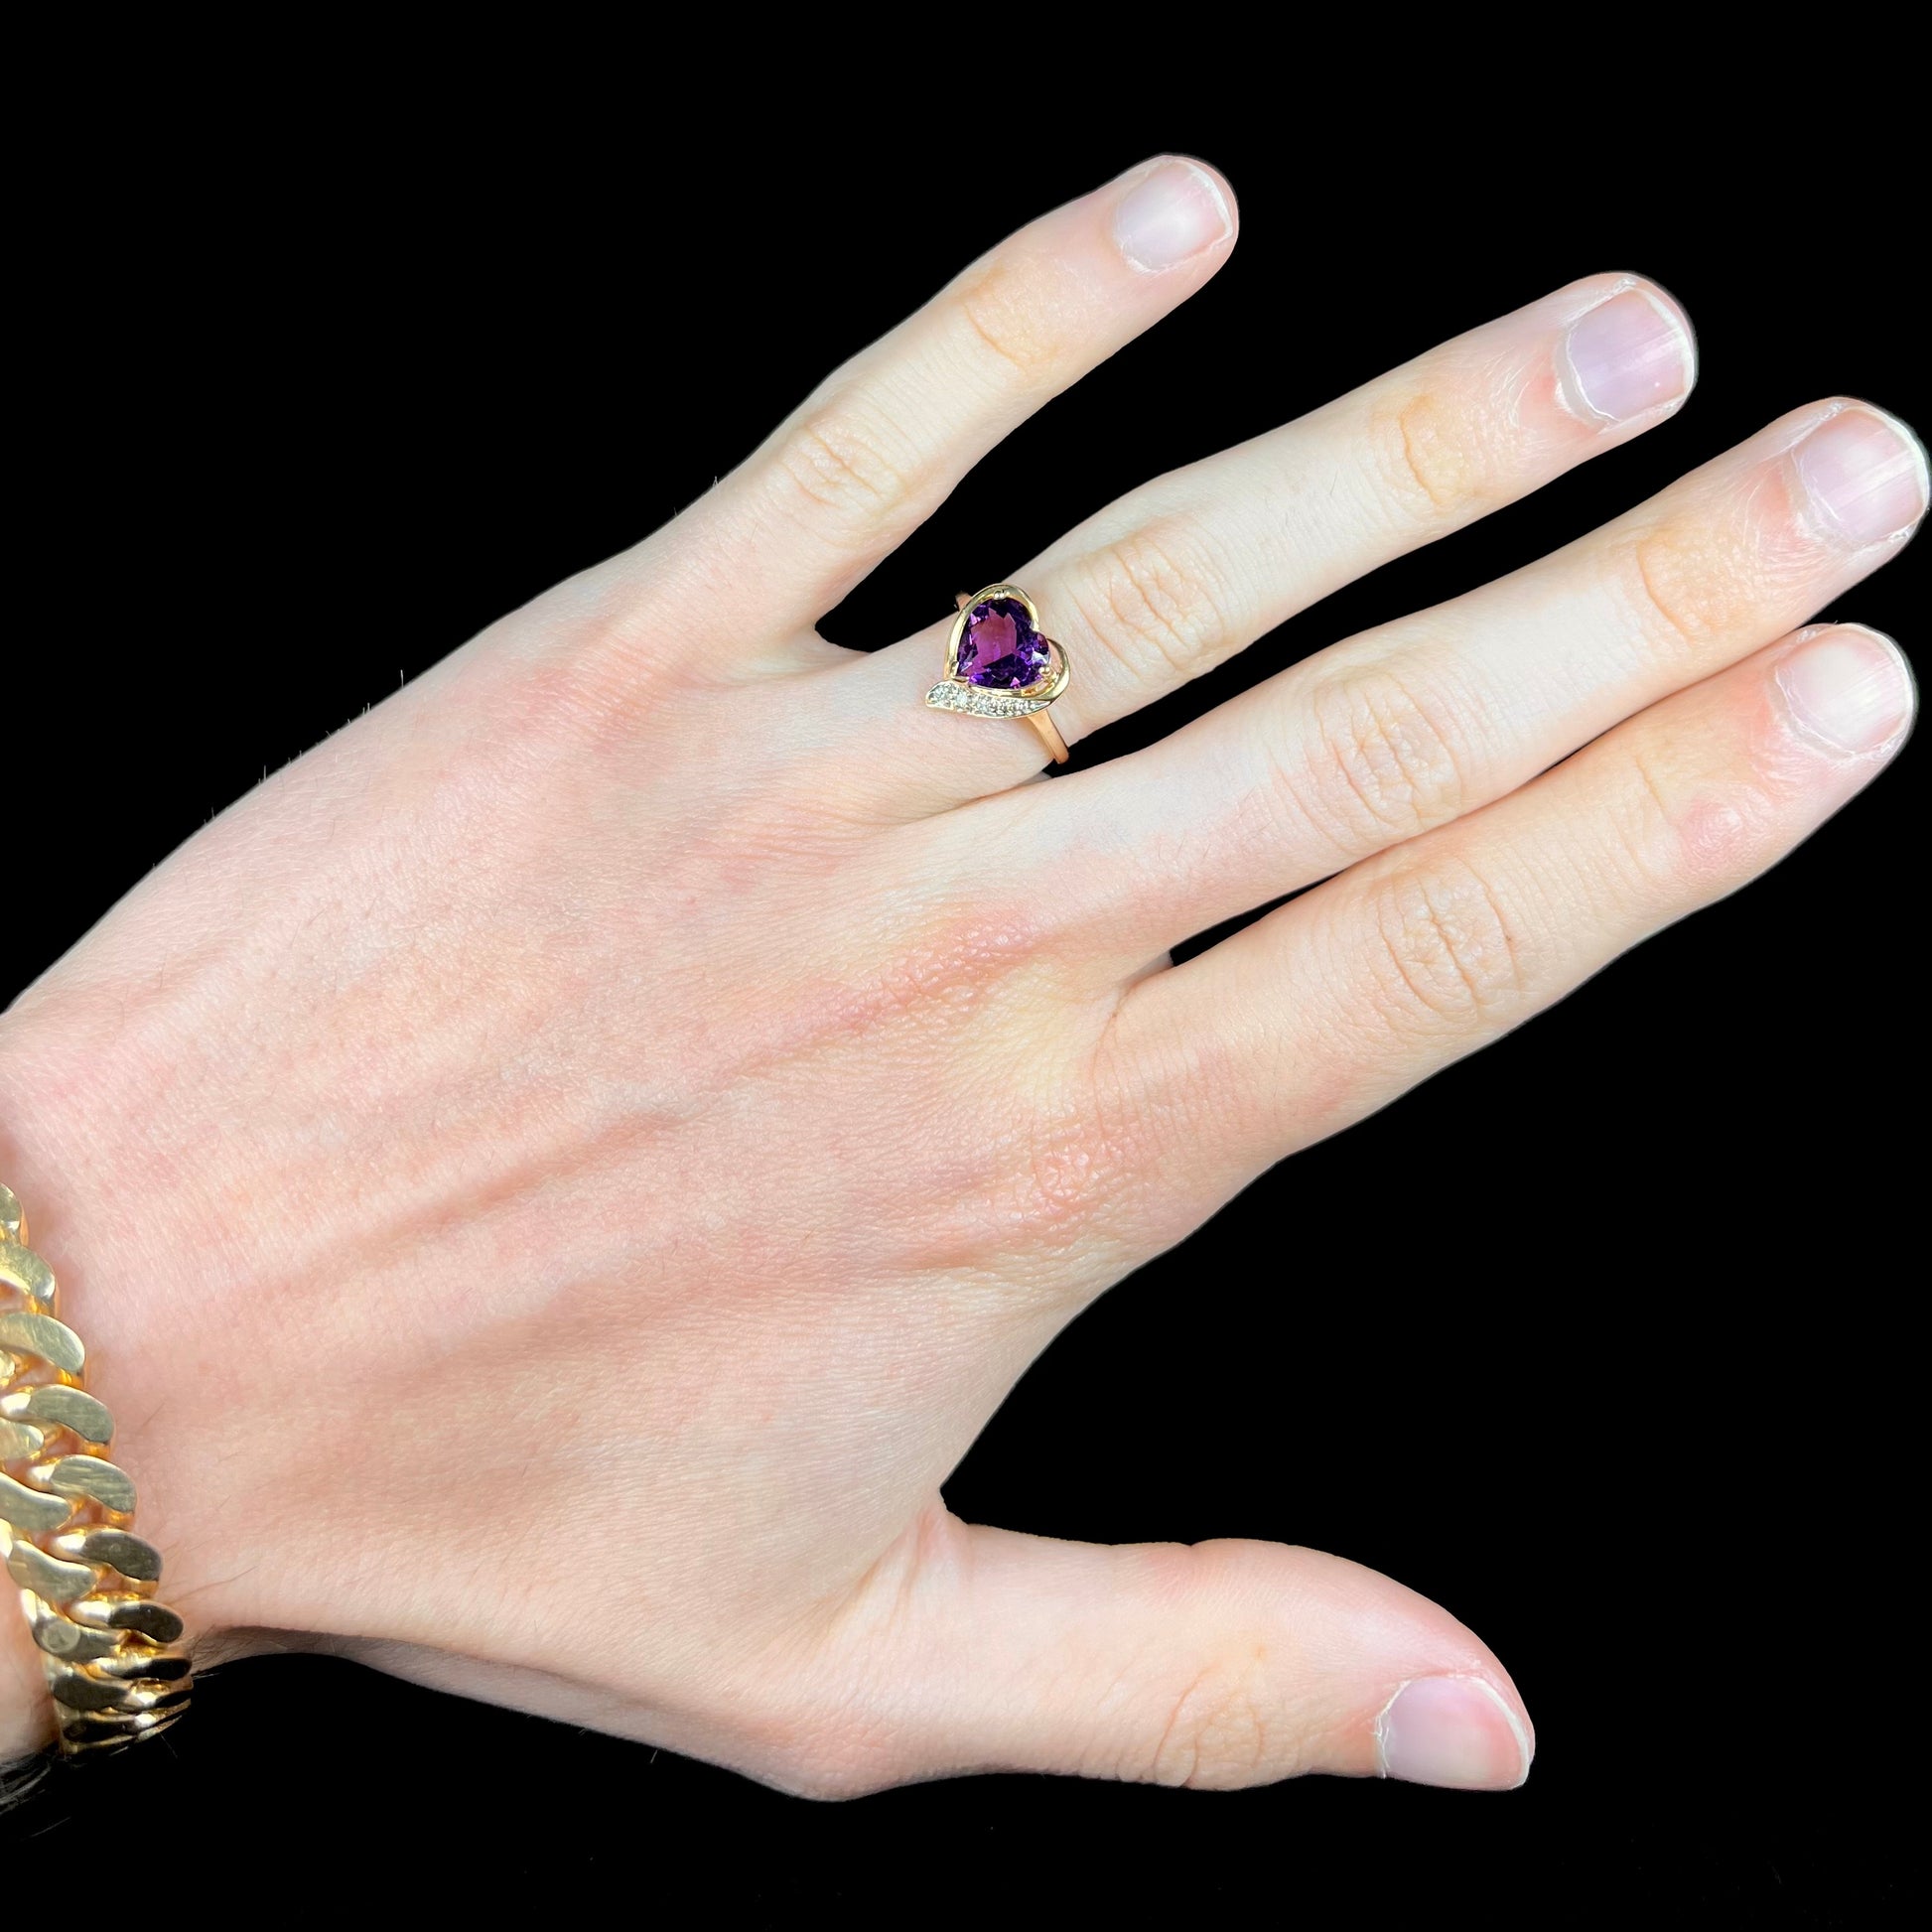 A ladies' yellow gold ring set with a heart shaped amethyst and round cut diamond accents.